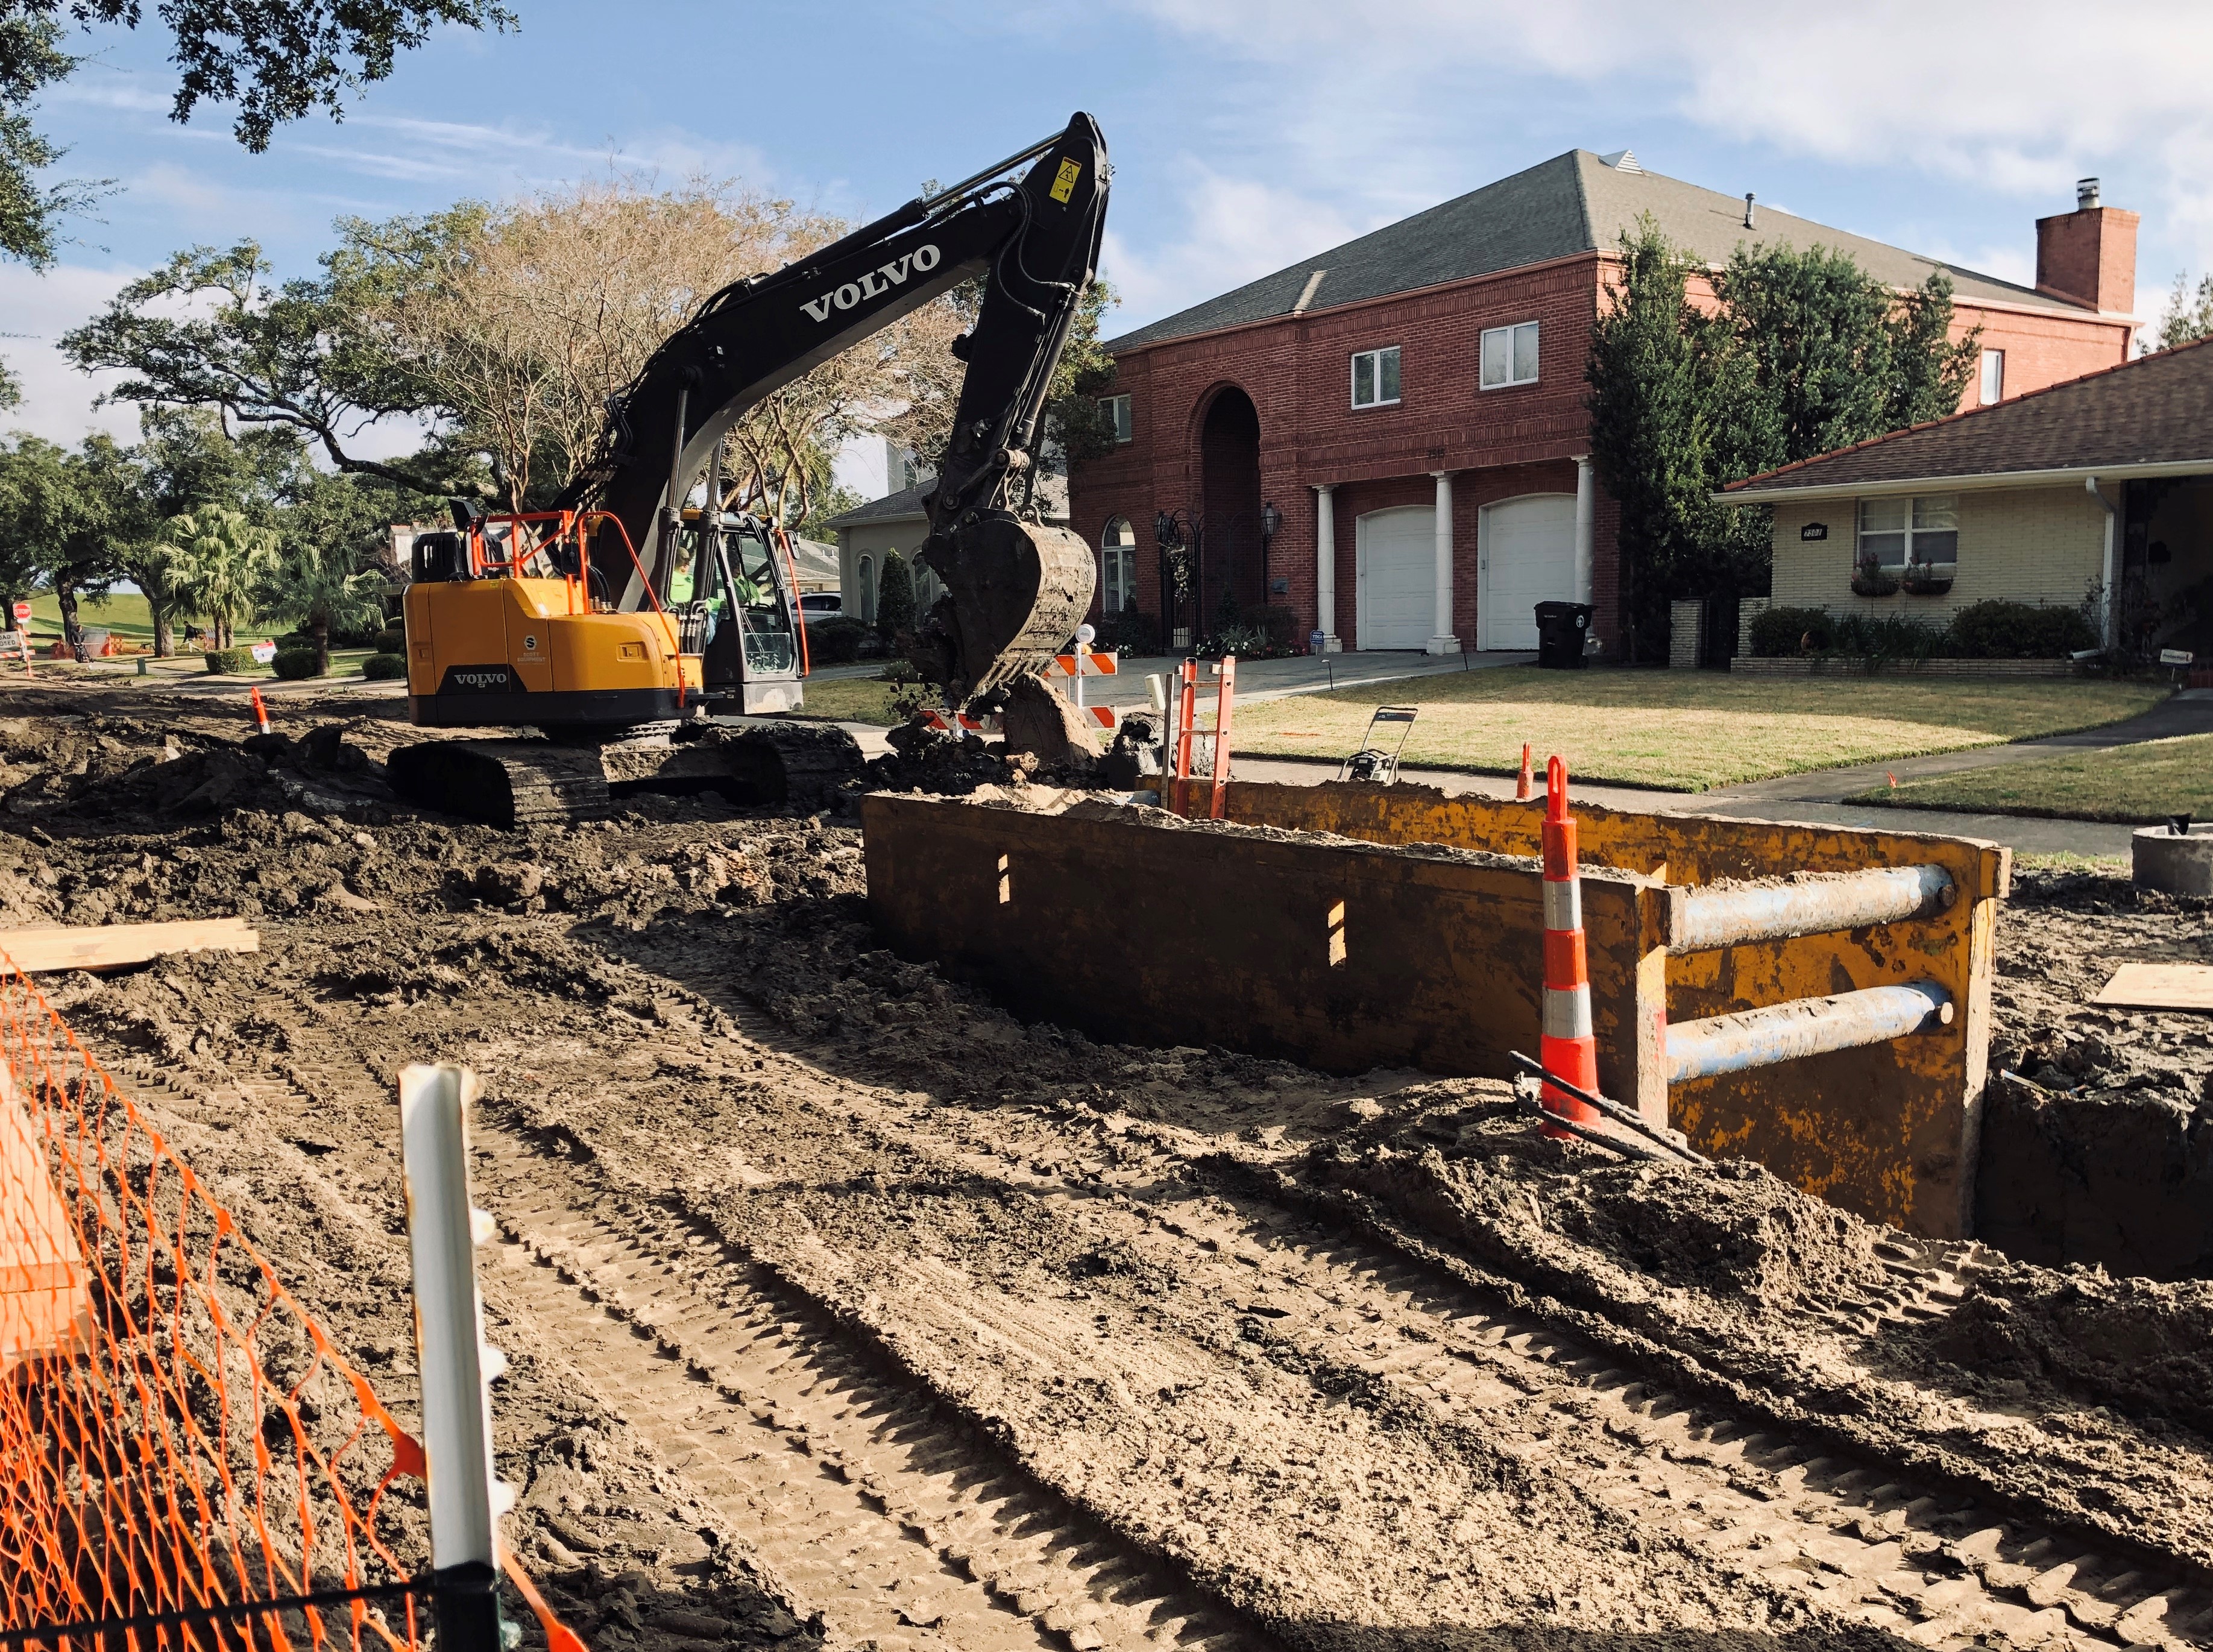 CANAL BOULEVARD RECONSTRUCTION PROJECT COMPLETES DRAINAGE INSTALLATION